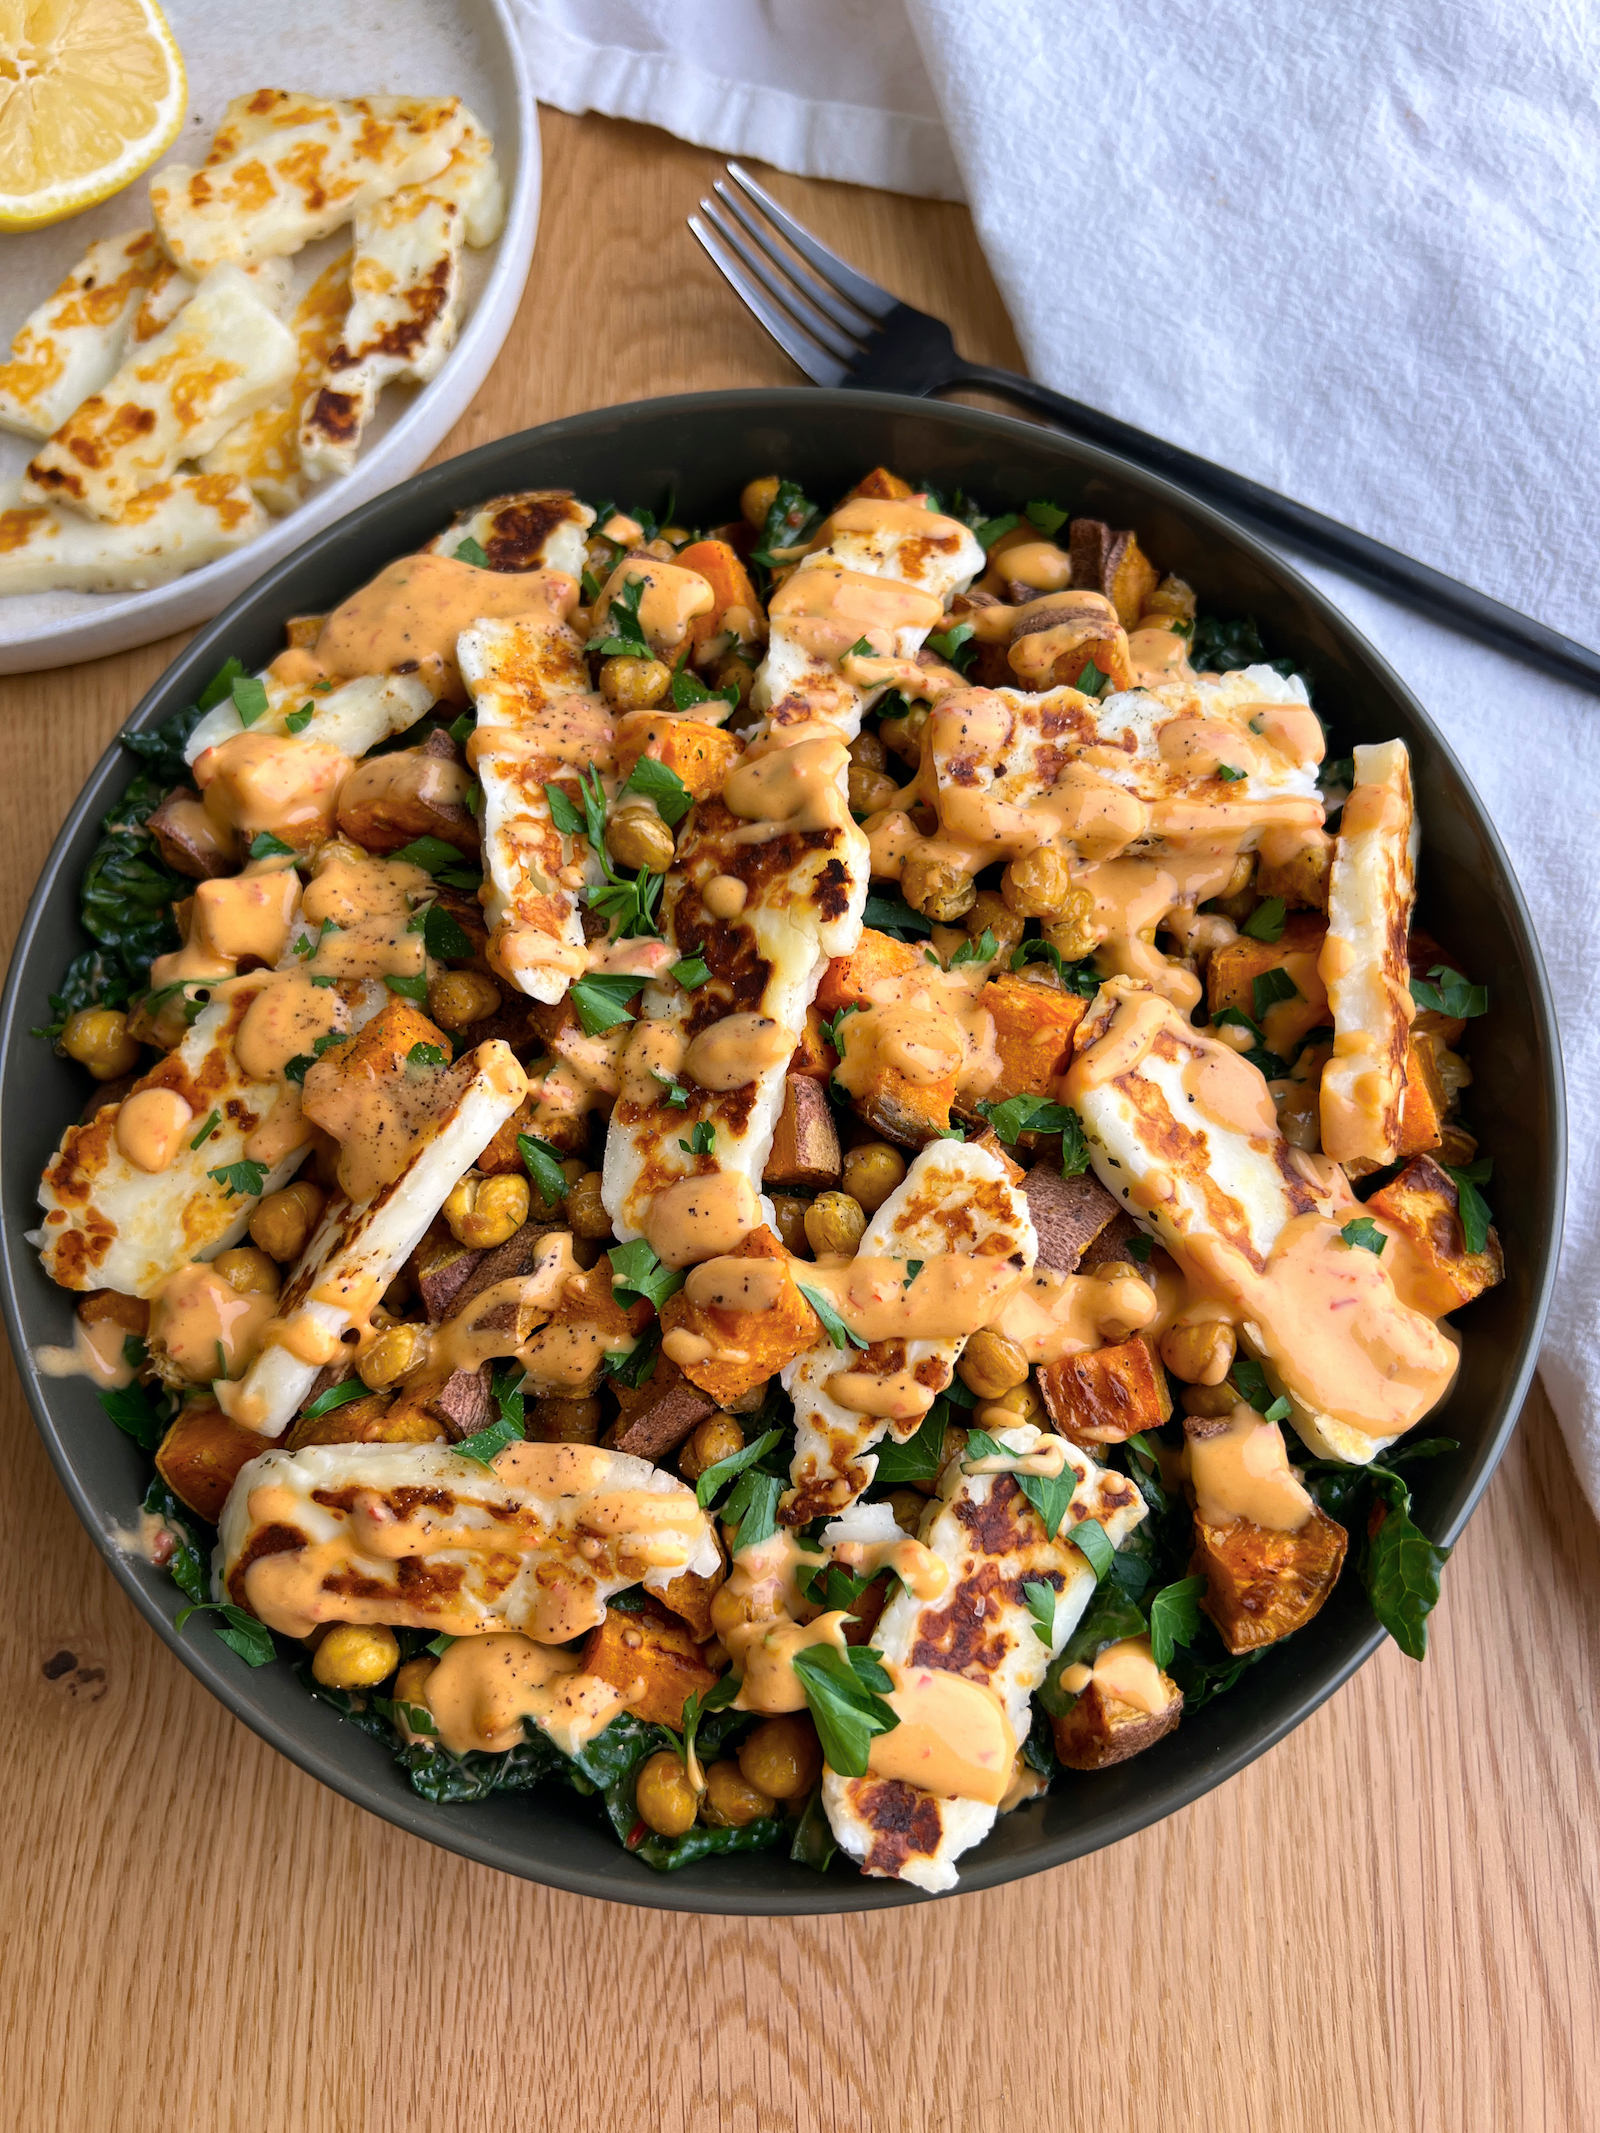 Halloumi and chickpea salad with harissa tahini dressing in green salad bowl